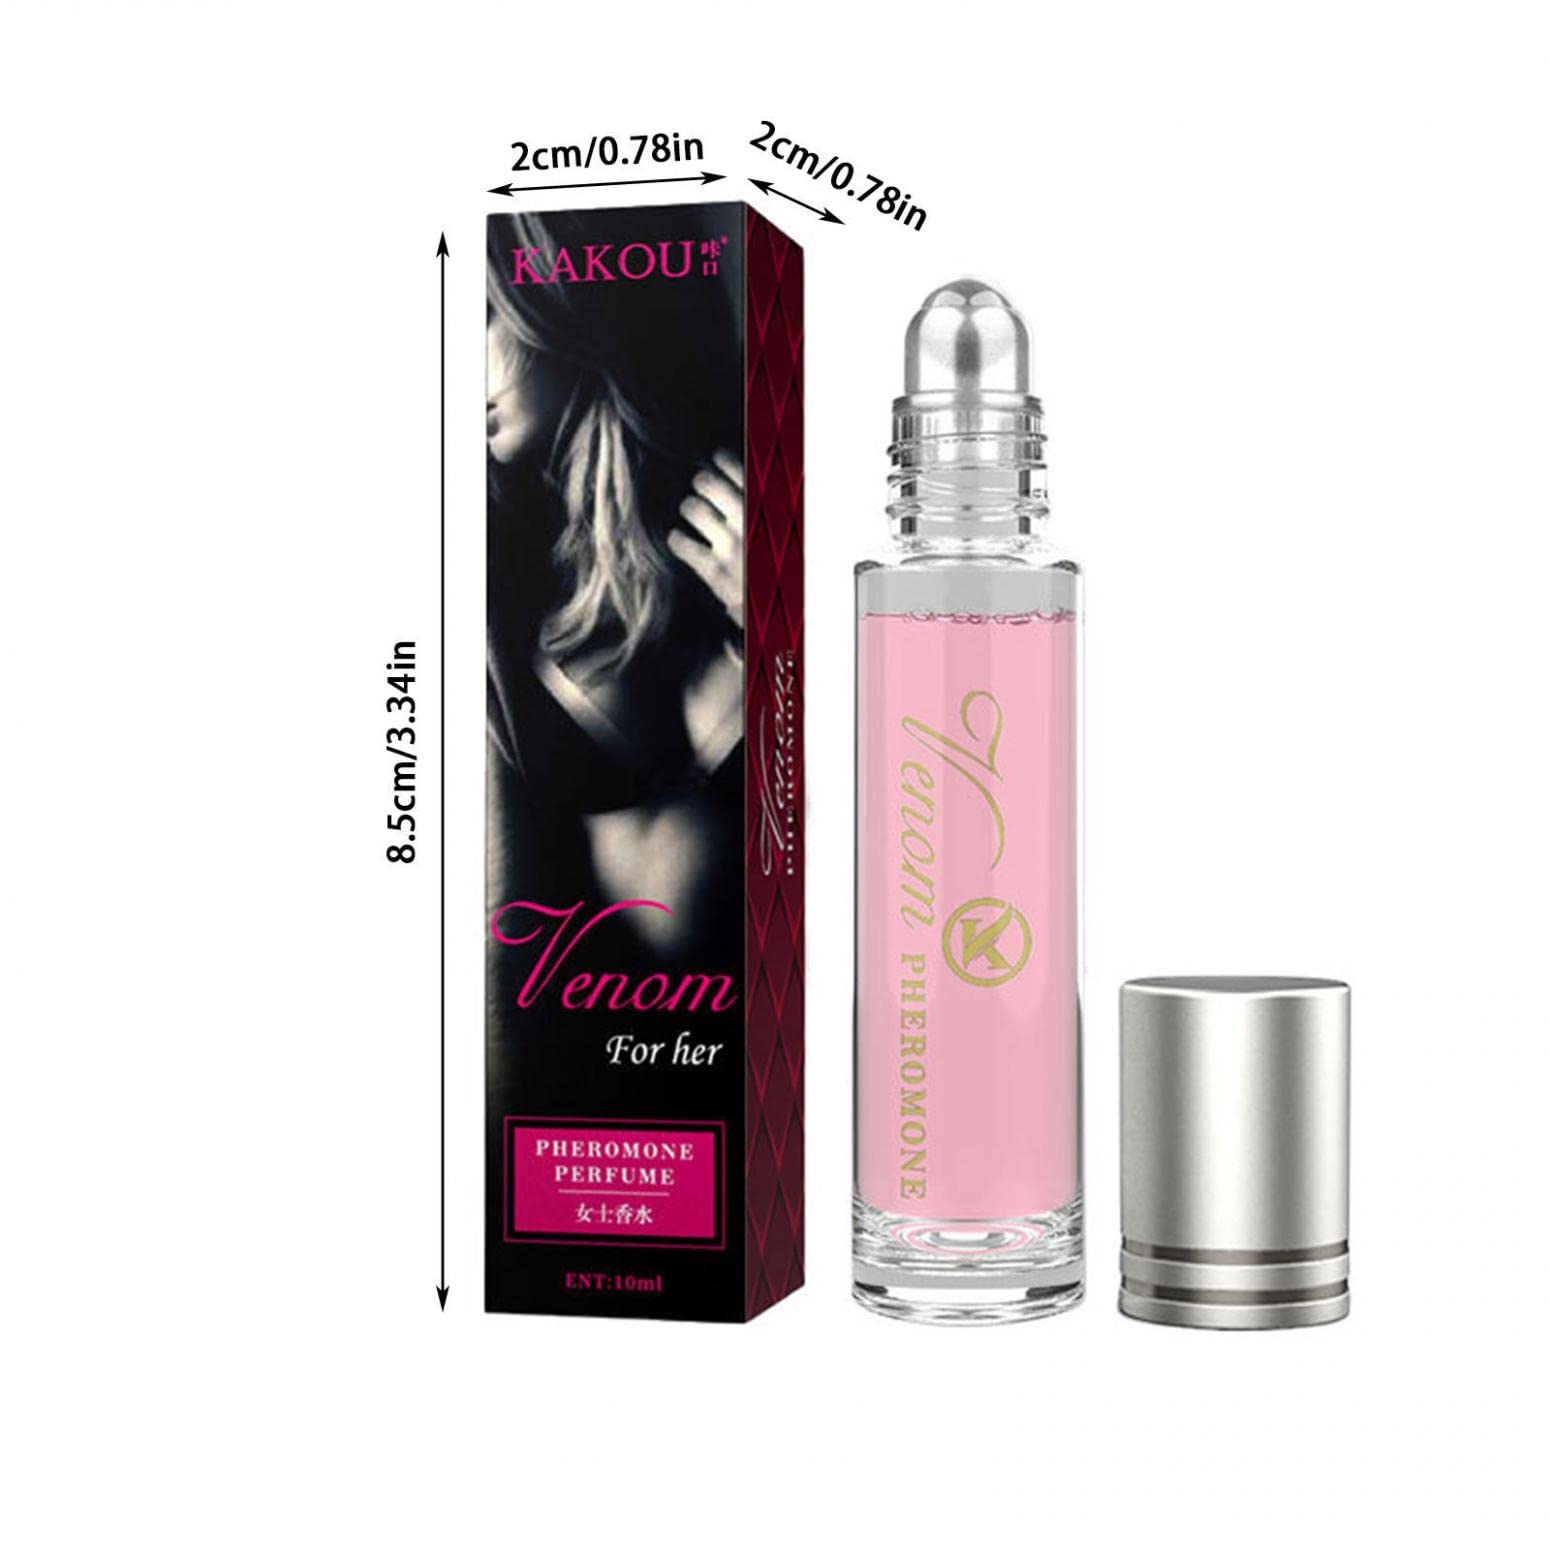 Flyss Long-Lasting Light Fragrance Pheromone Perfume for Women Roll On Perfume Party Perfume 10ml, 0.33 Oz, fits in the purse or pocket